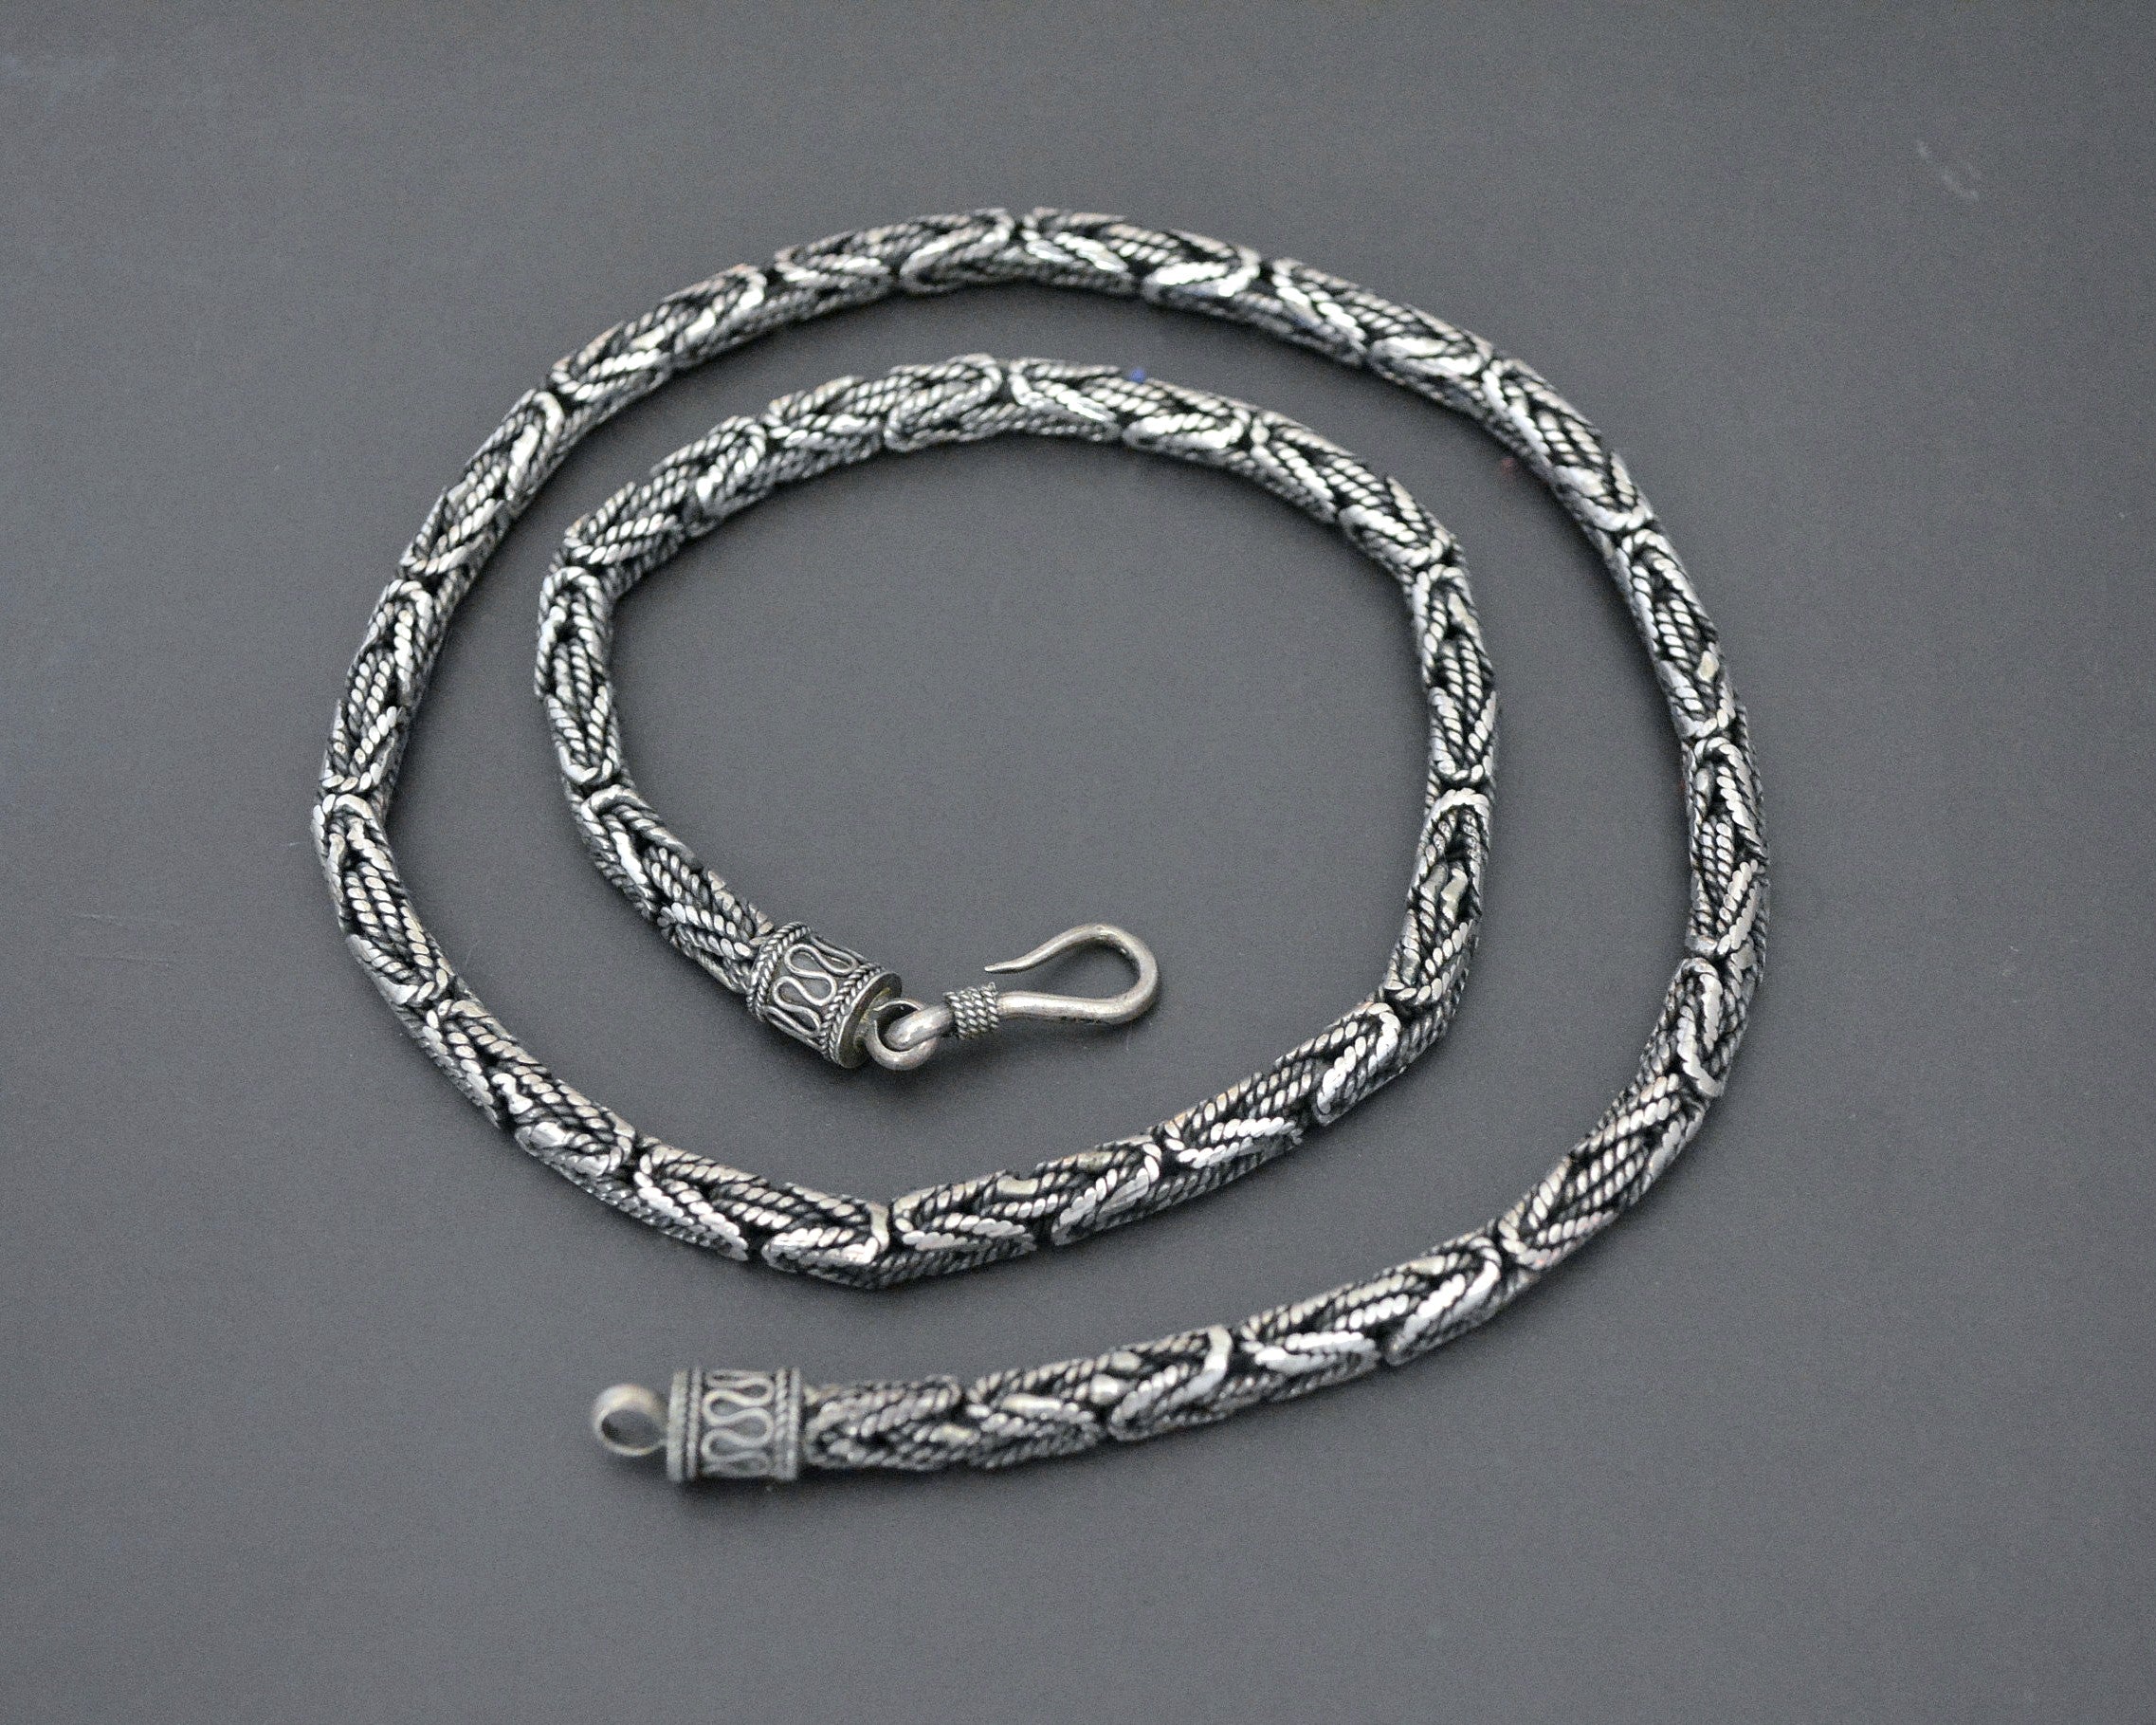 Bali Snake Chain Necklace - Sterling Silver